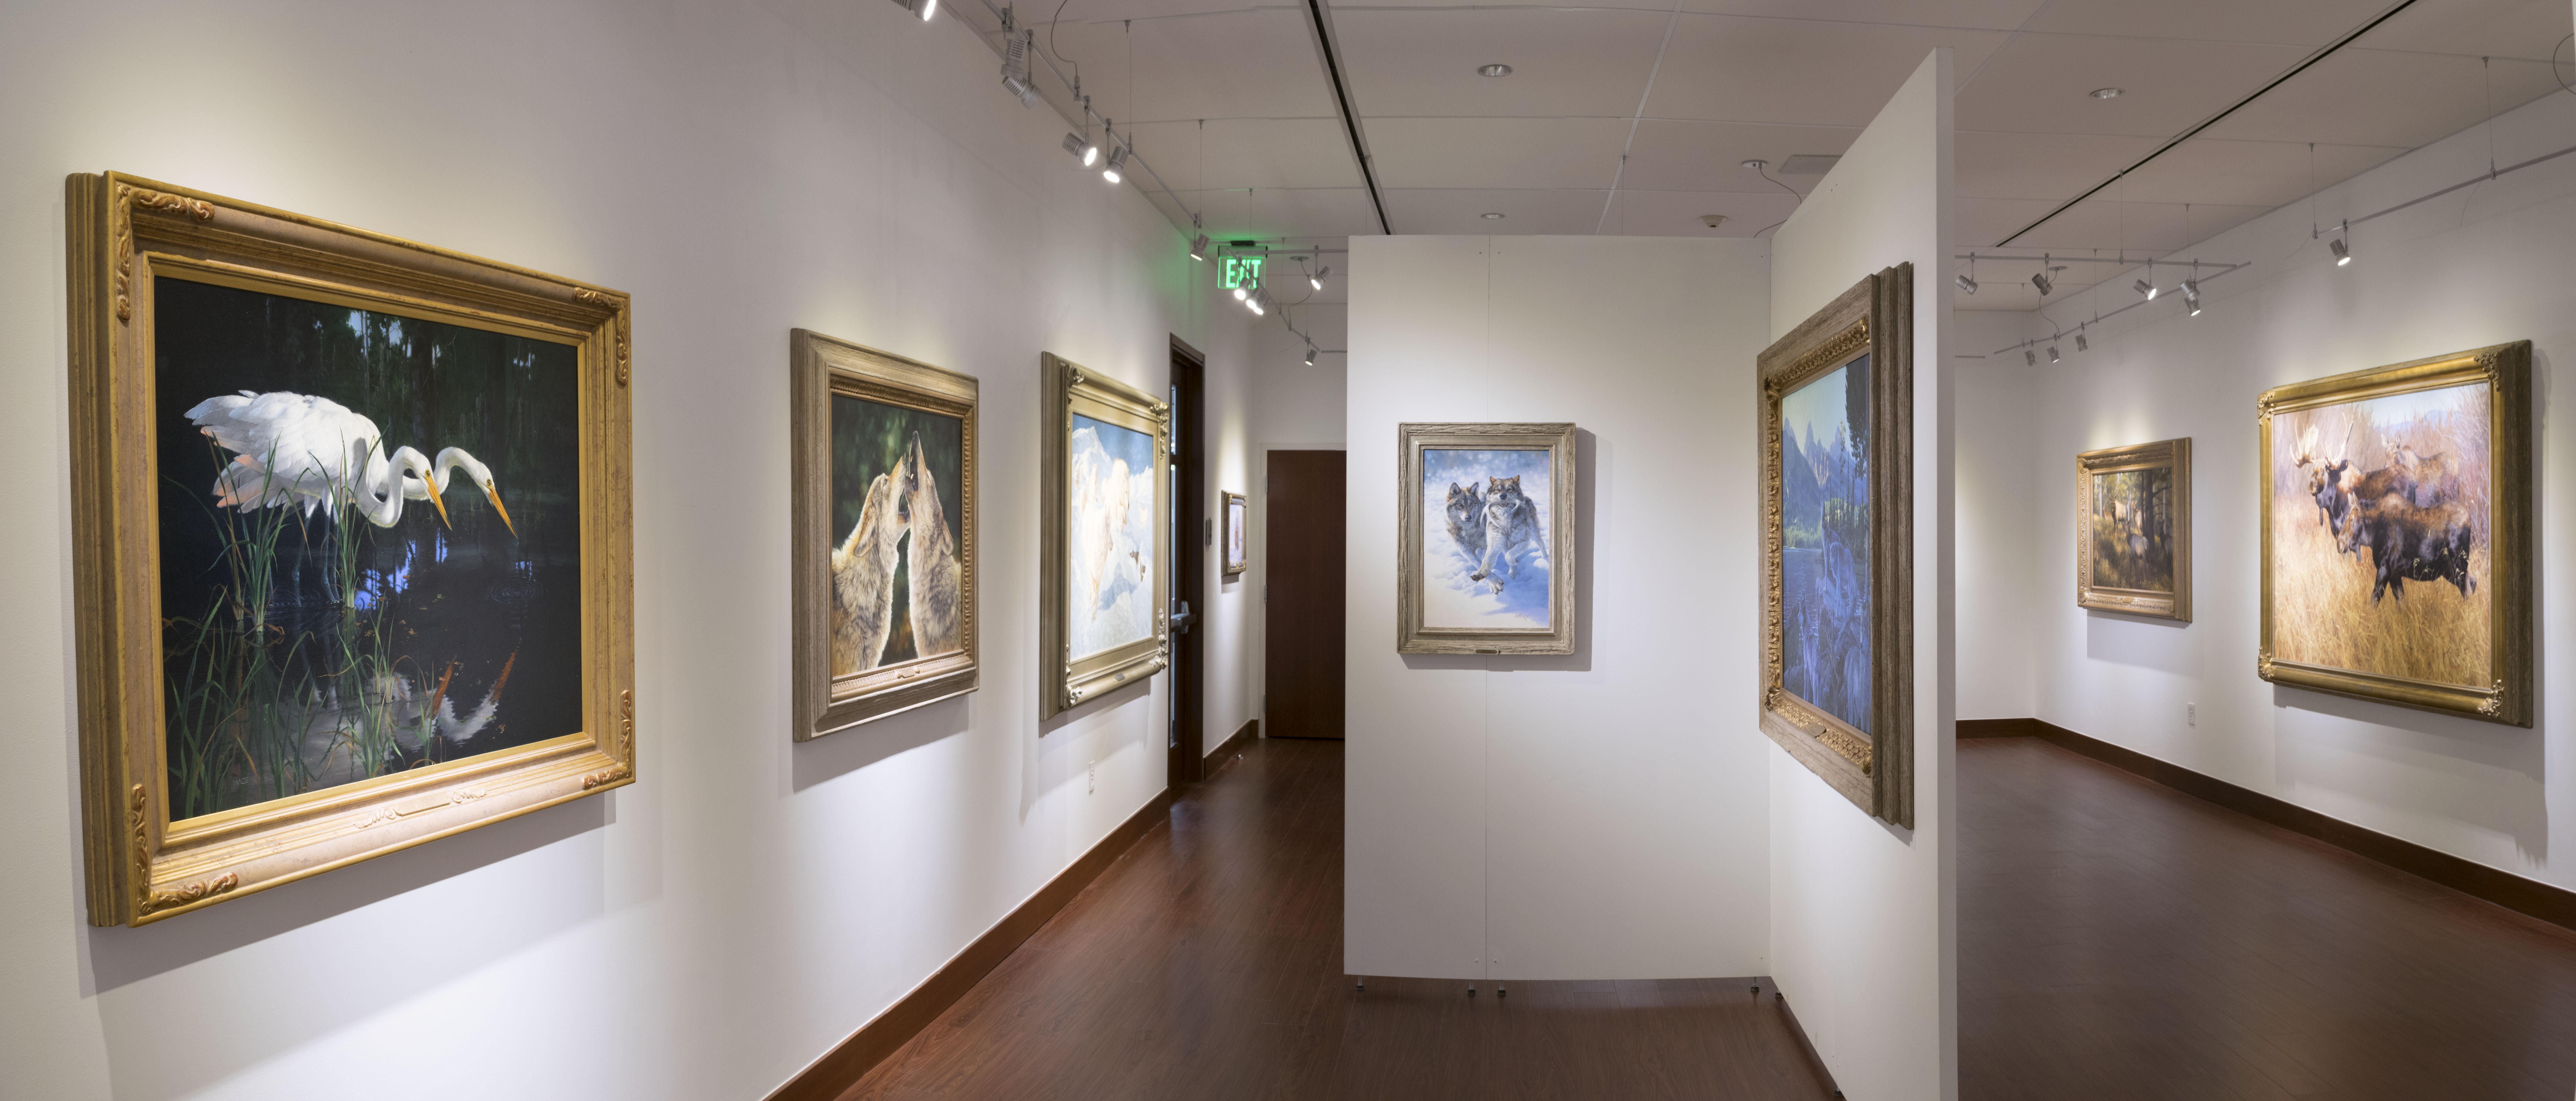 Installation View, Back of Gallery, Creatures of the Wild West: Selections from the Don B. Huntley Collection, 2016.